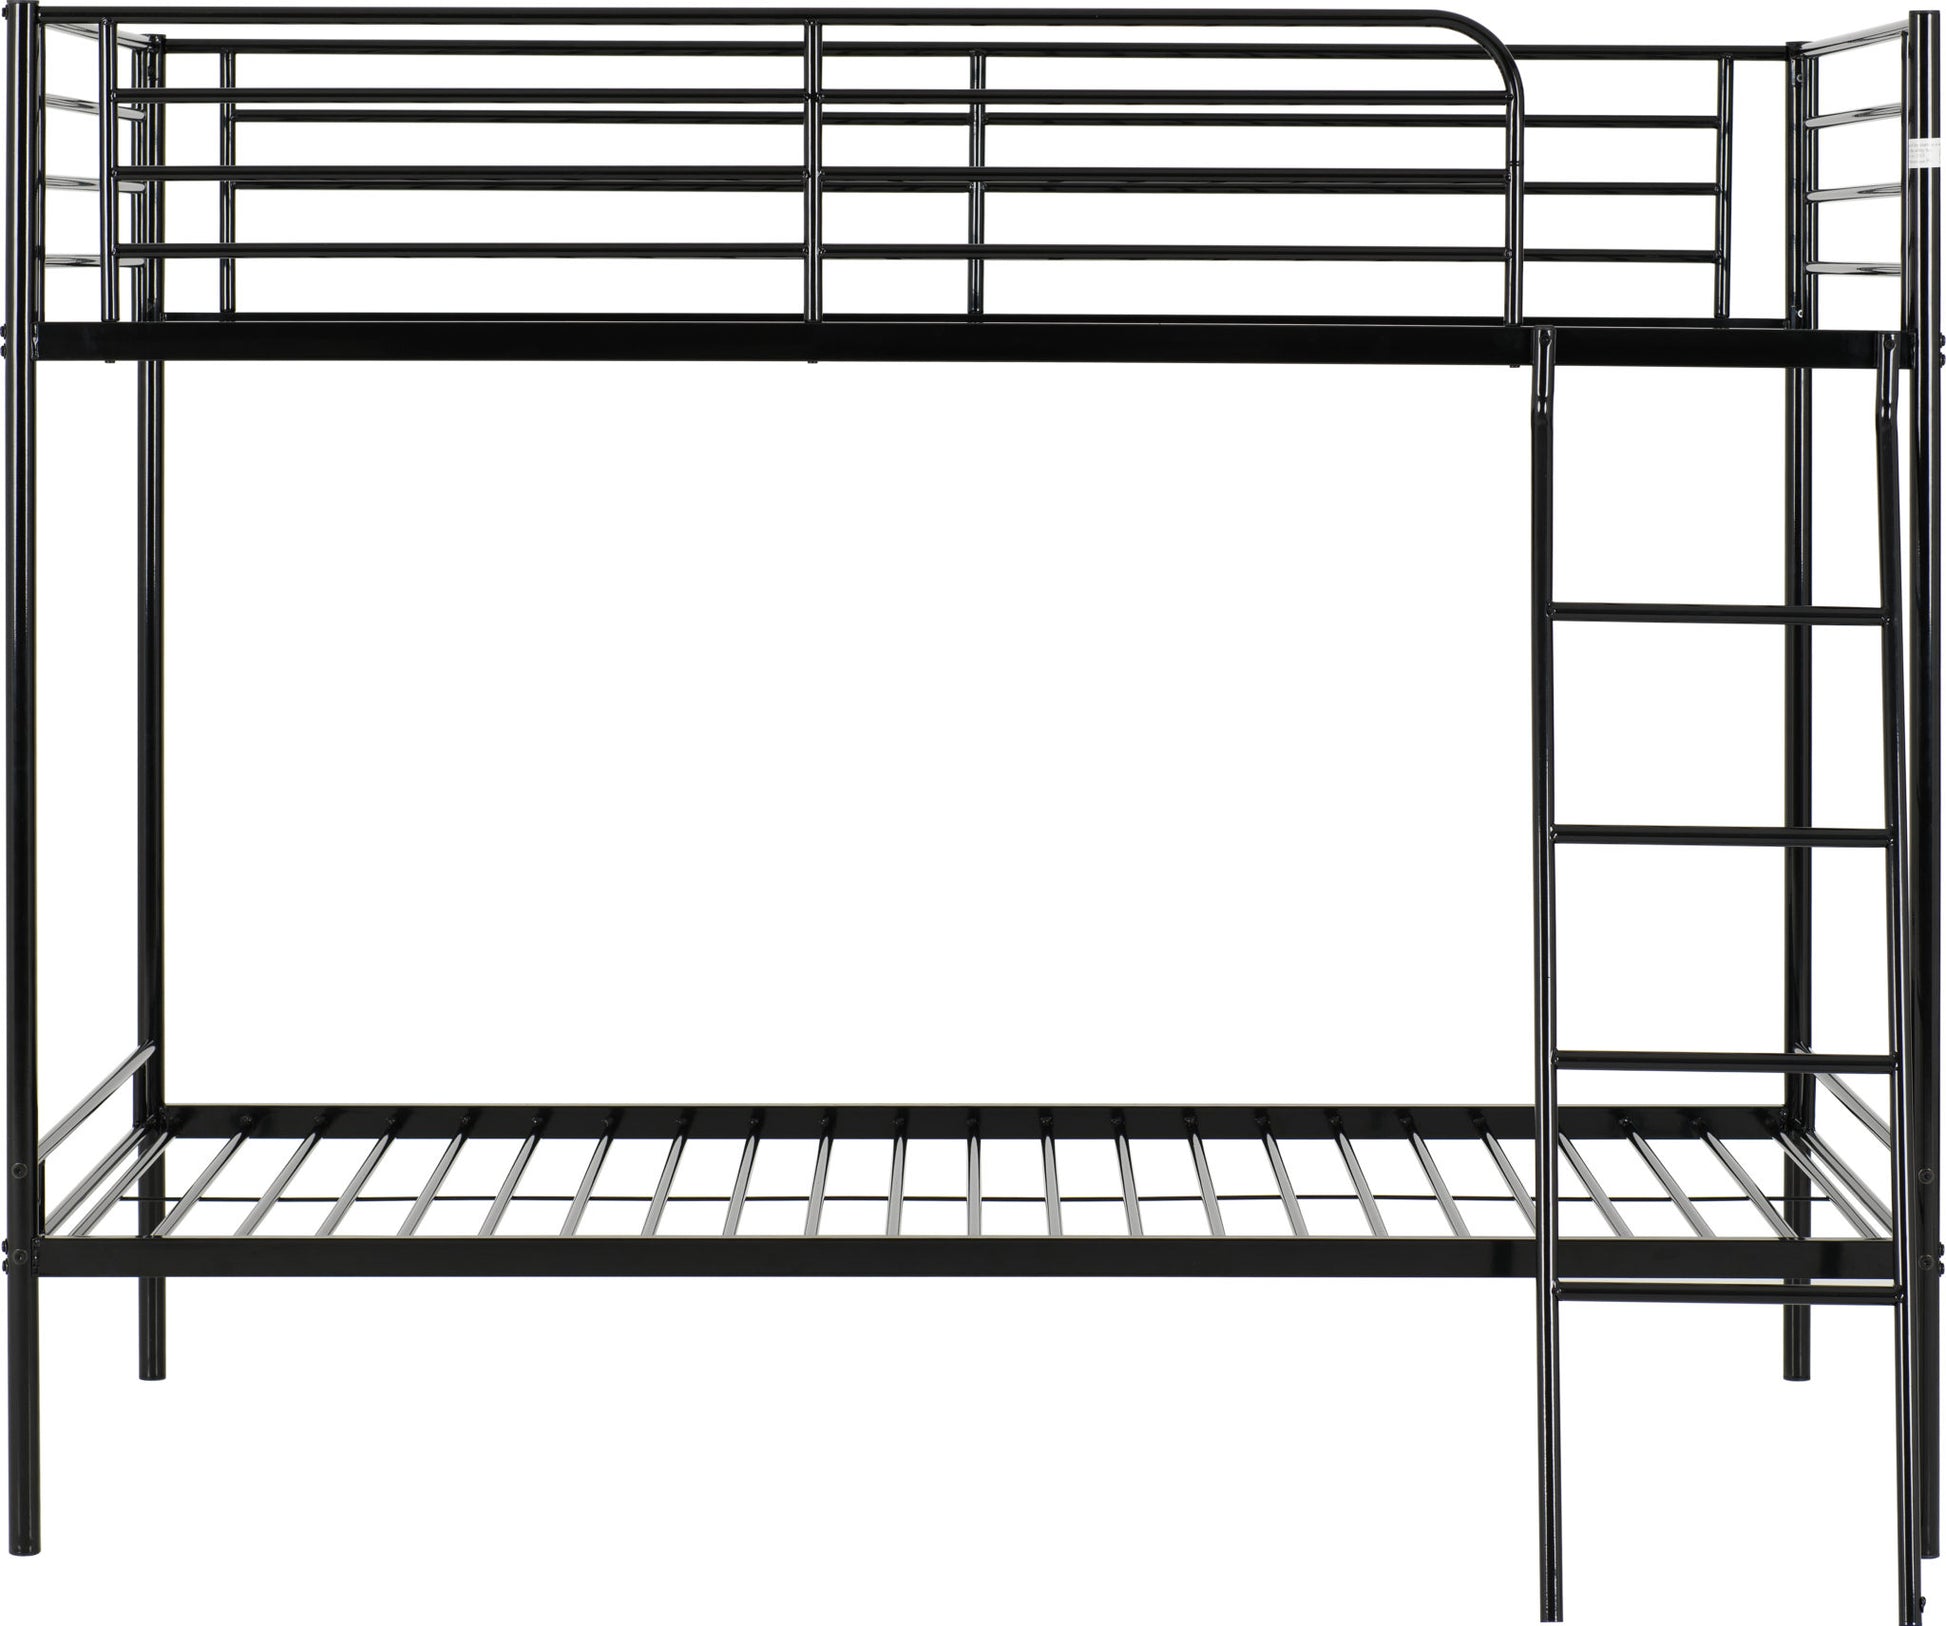 Brandon 3' Bunk Bed Black- The Right Buy Store